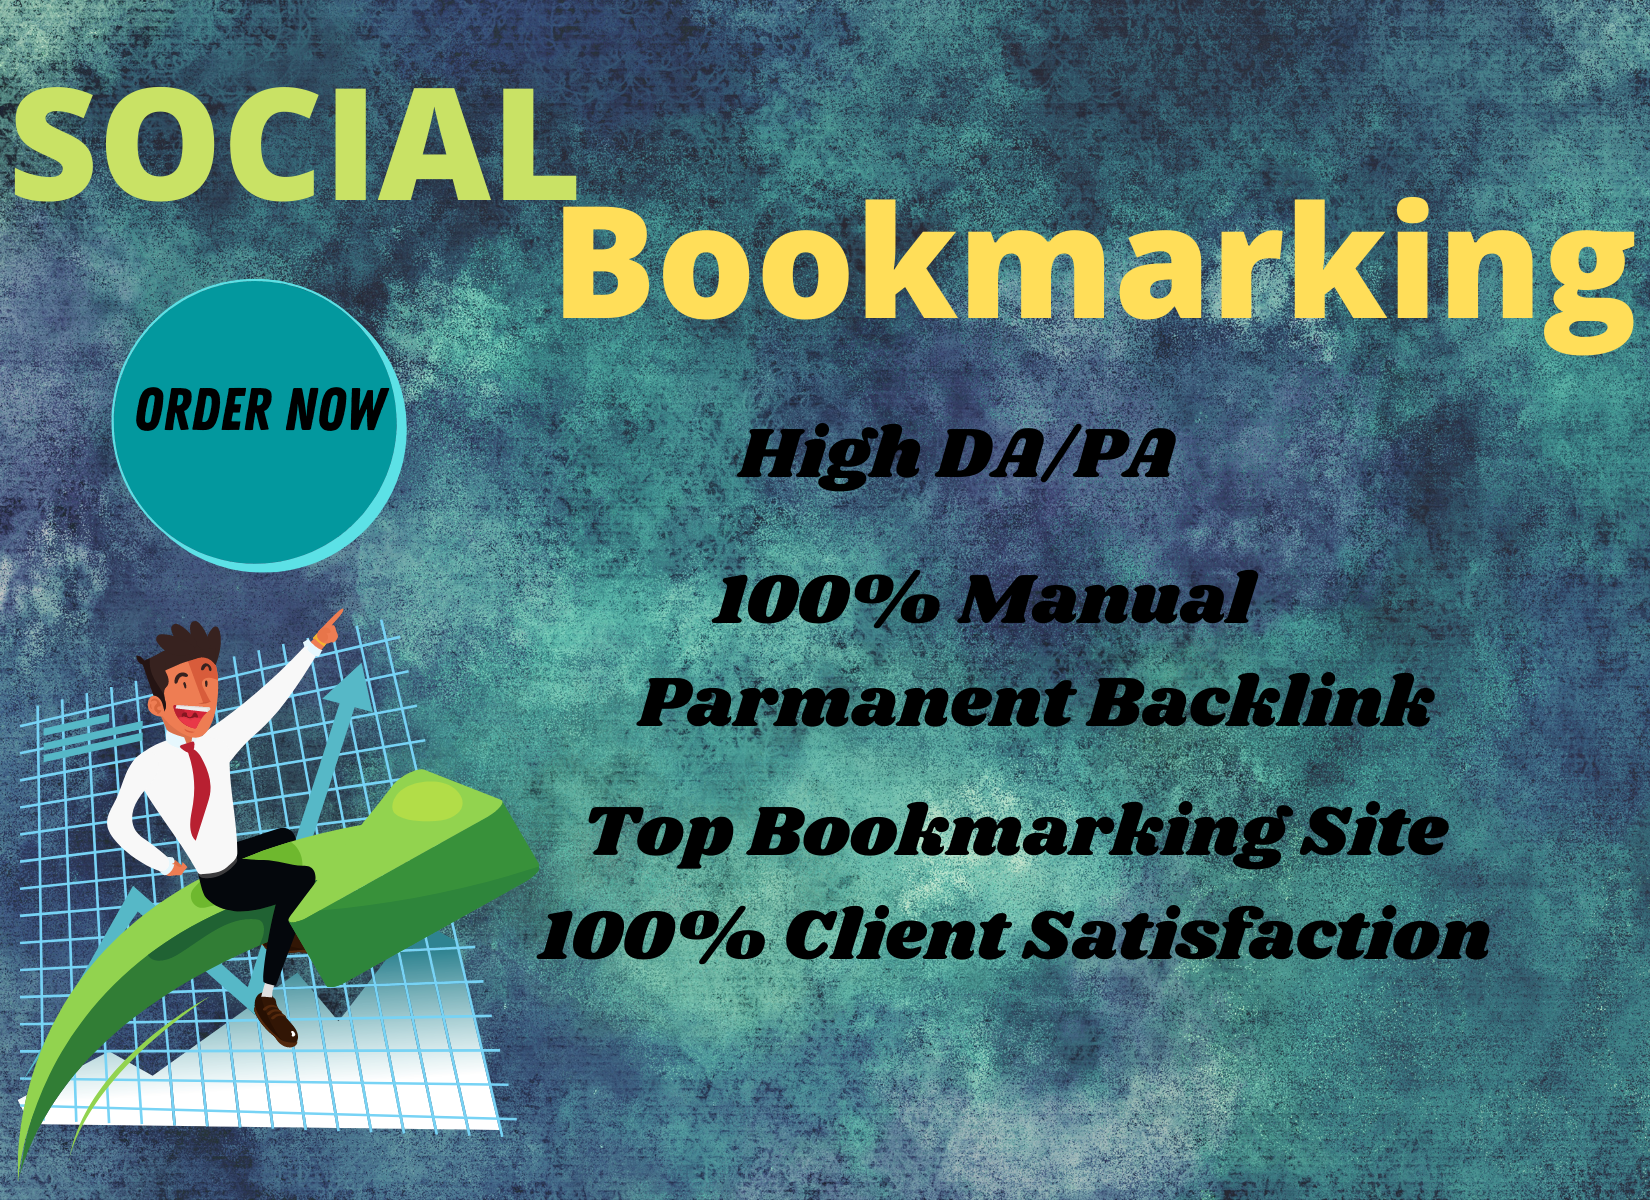 I will create manually 15 social bookmarking for traffic boosting